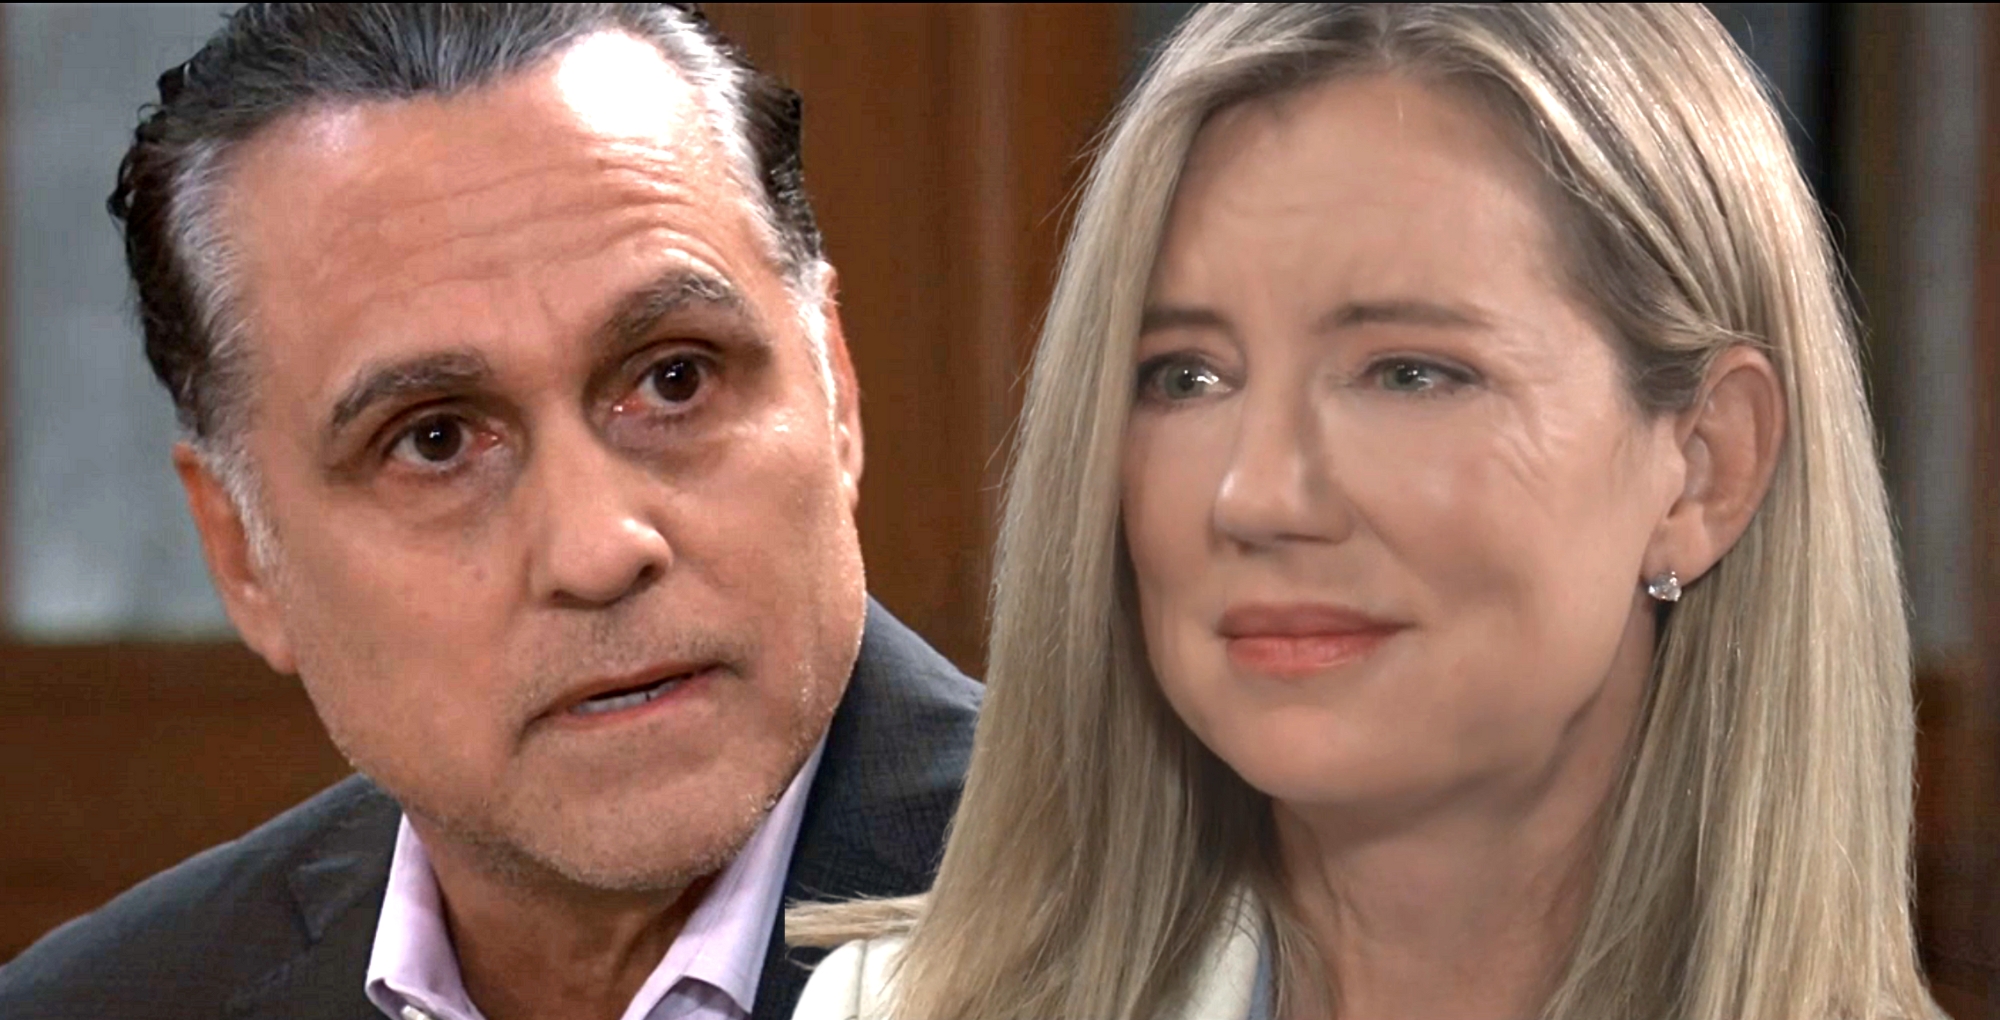 gh spoilers speculation that sonny won't forgive nina.